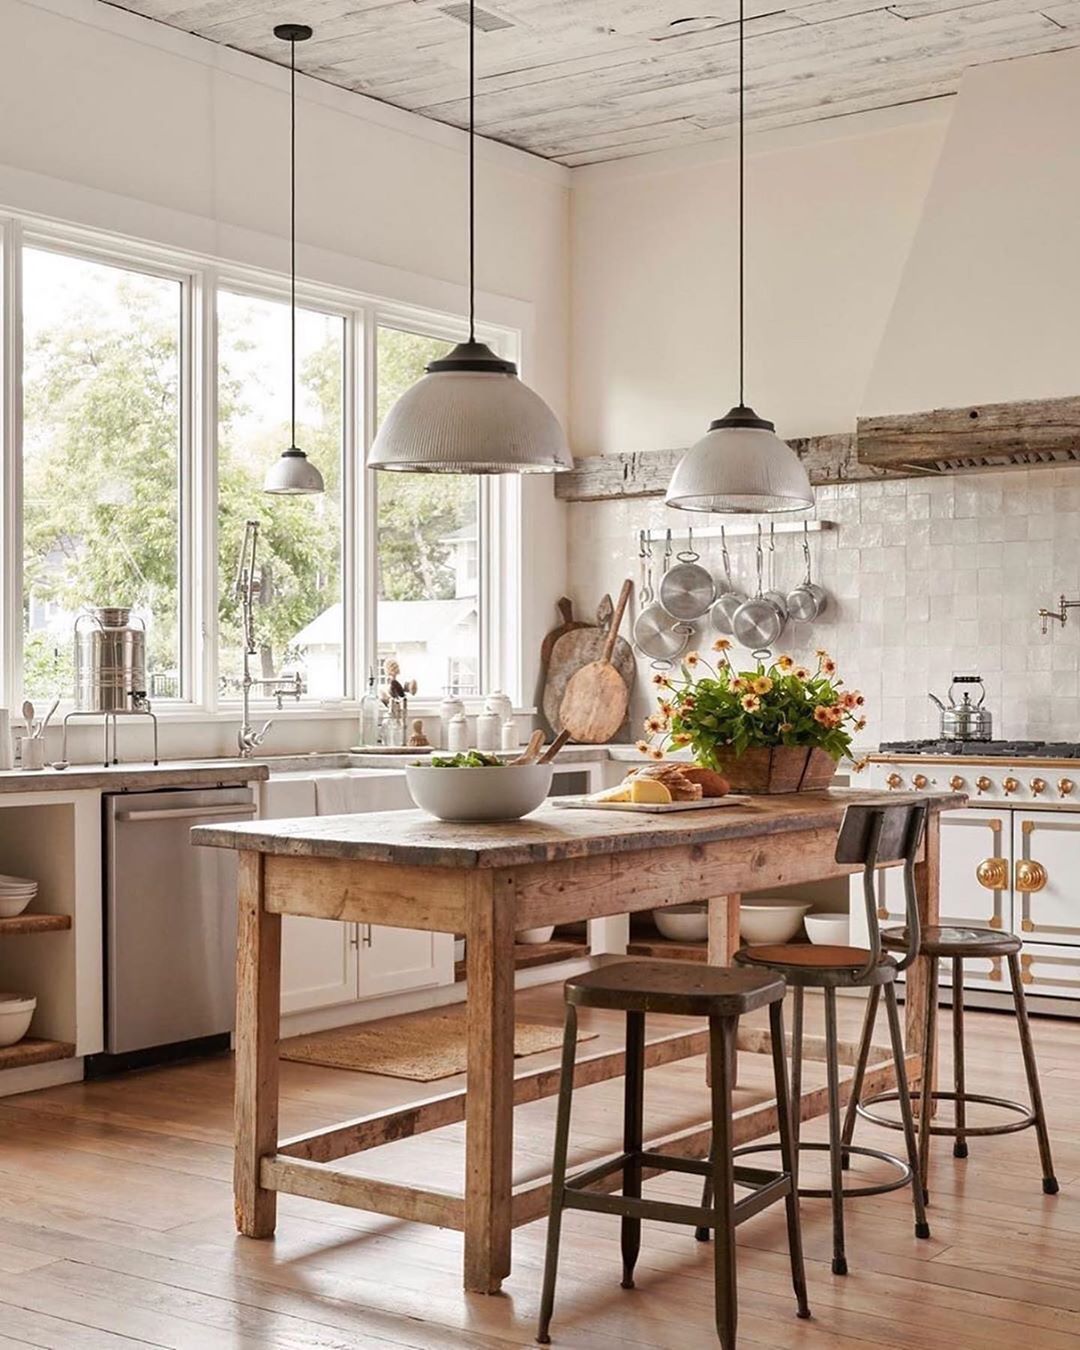 A Buyer's Guide to Bespoke Kitchen Design